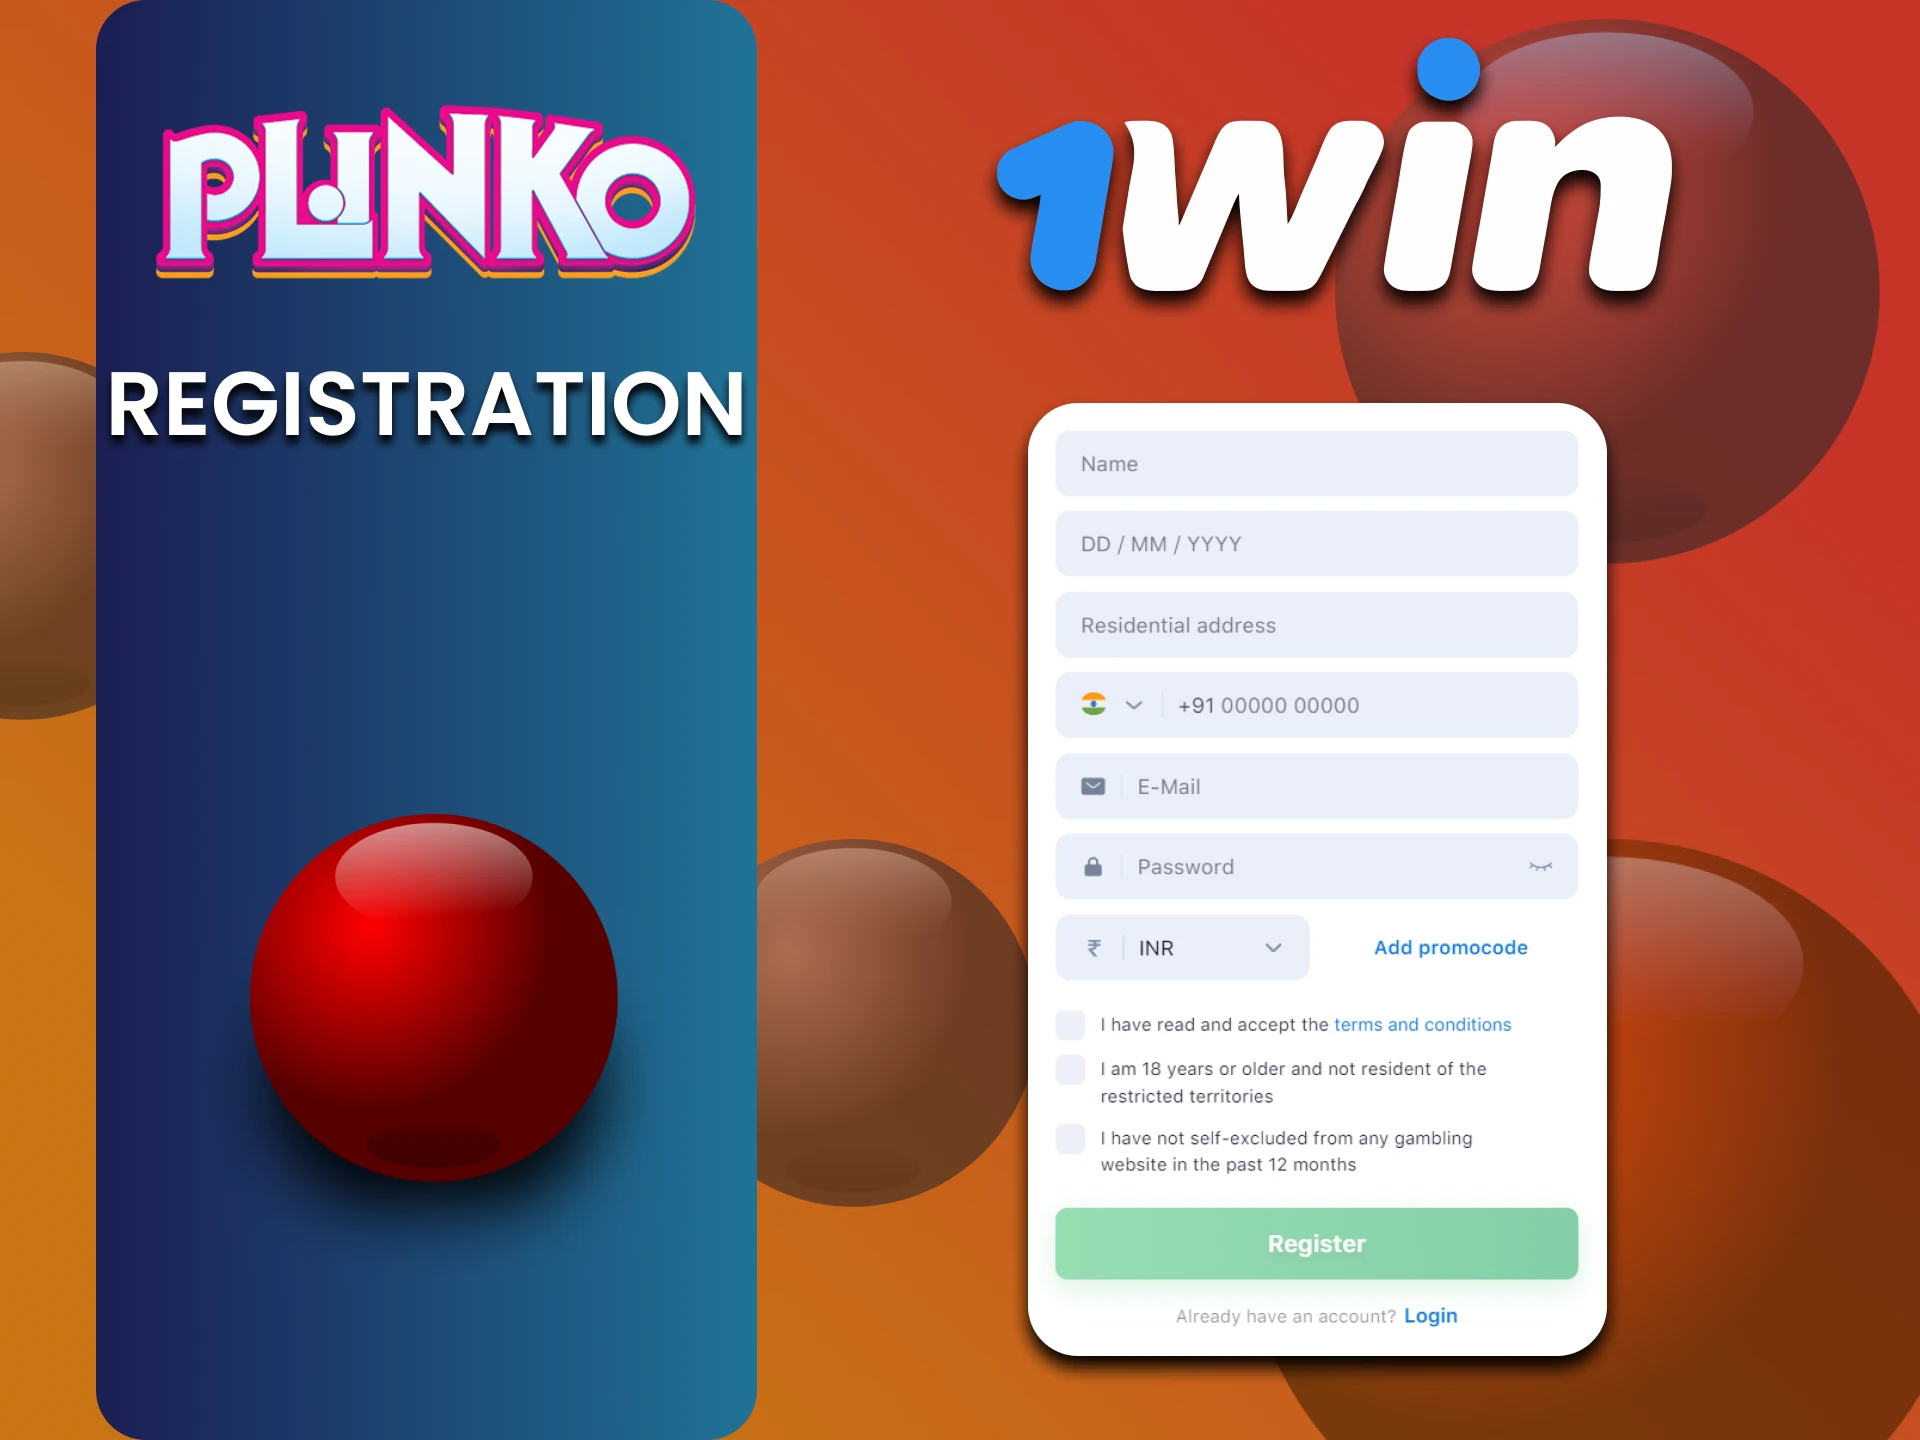 Create a personal account on 1win to play Plinko.